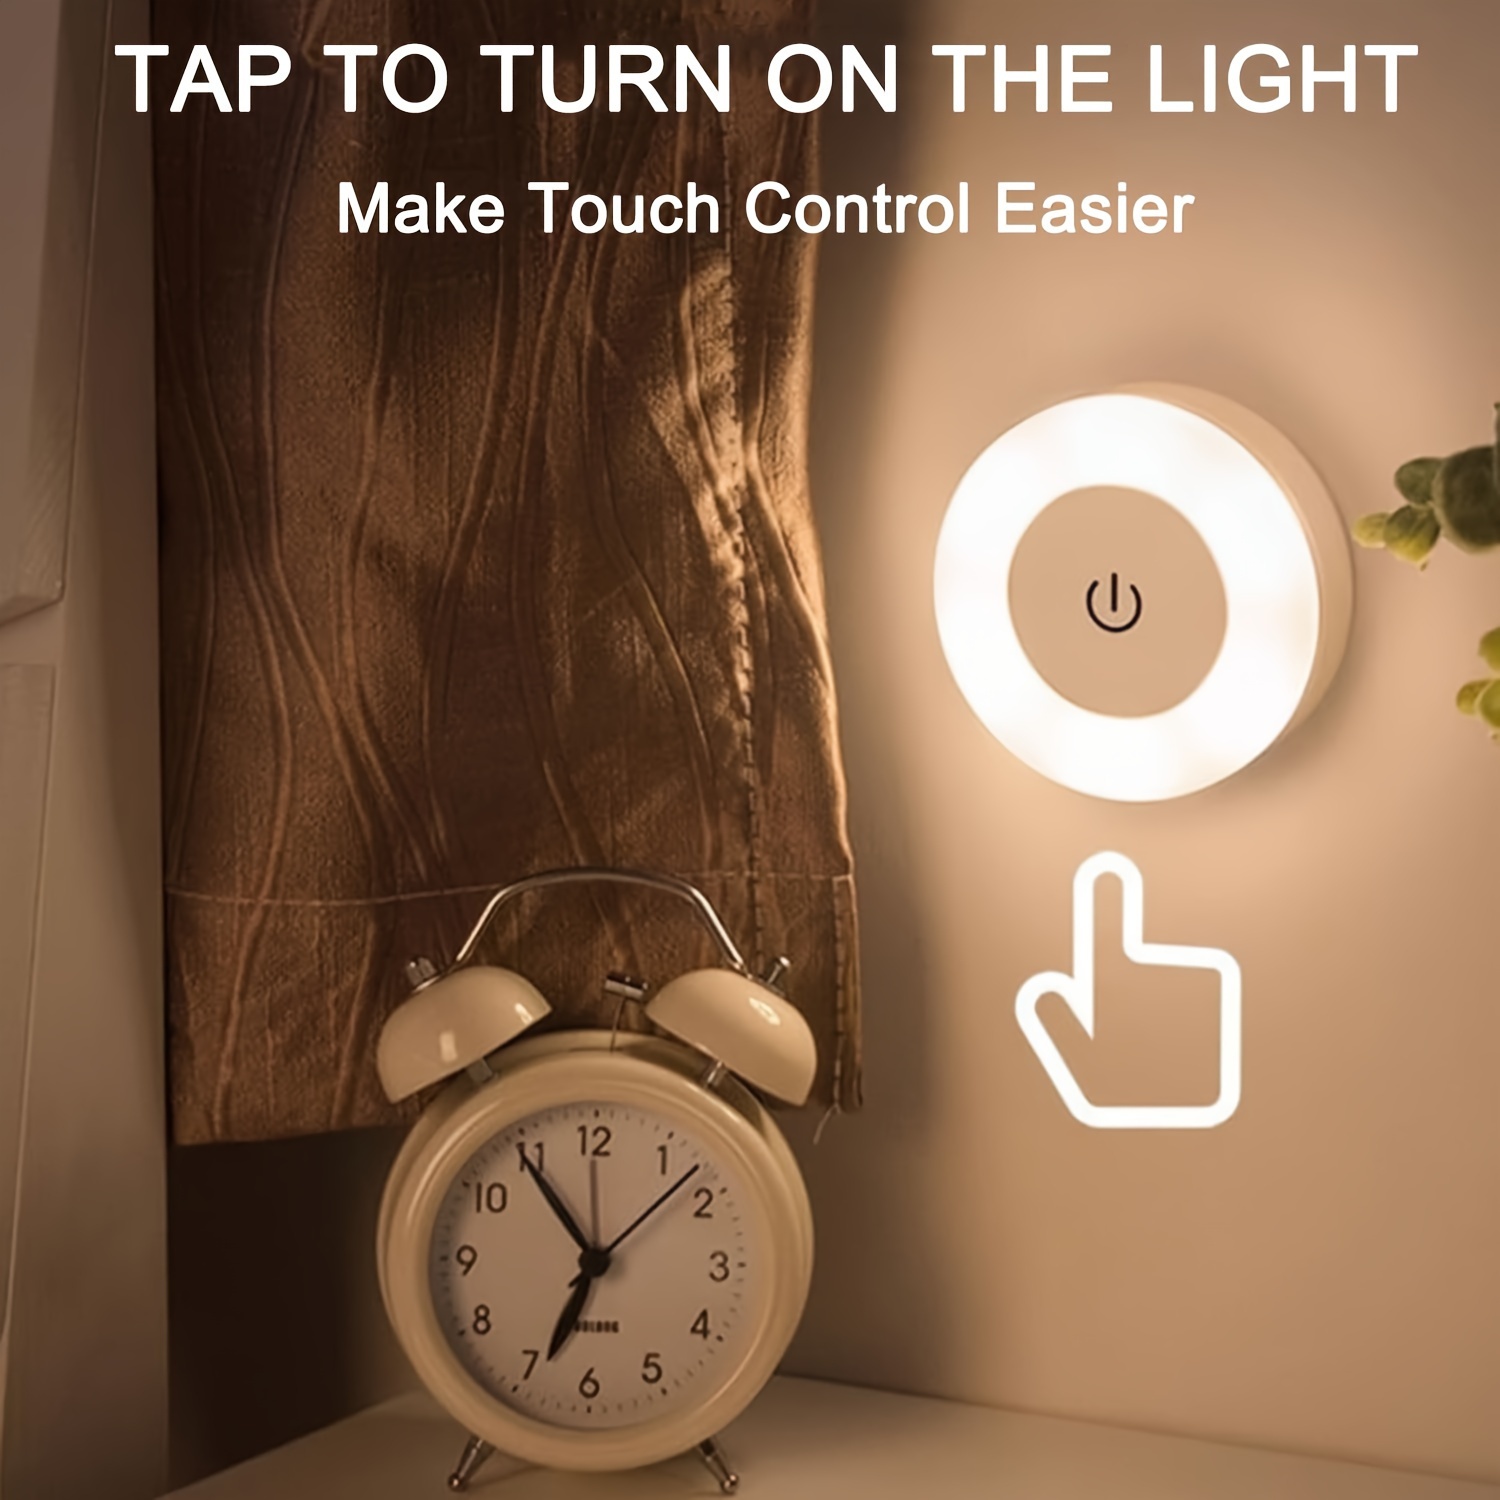 

1pc Led Touch Night Light, Bedroom Decorative Light, Dimmable, Suitable For Aisle, Bedroom, Washroom, Living Room, Wardrobe, Cabinet (warm Light/white Light)